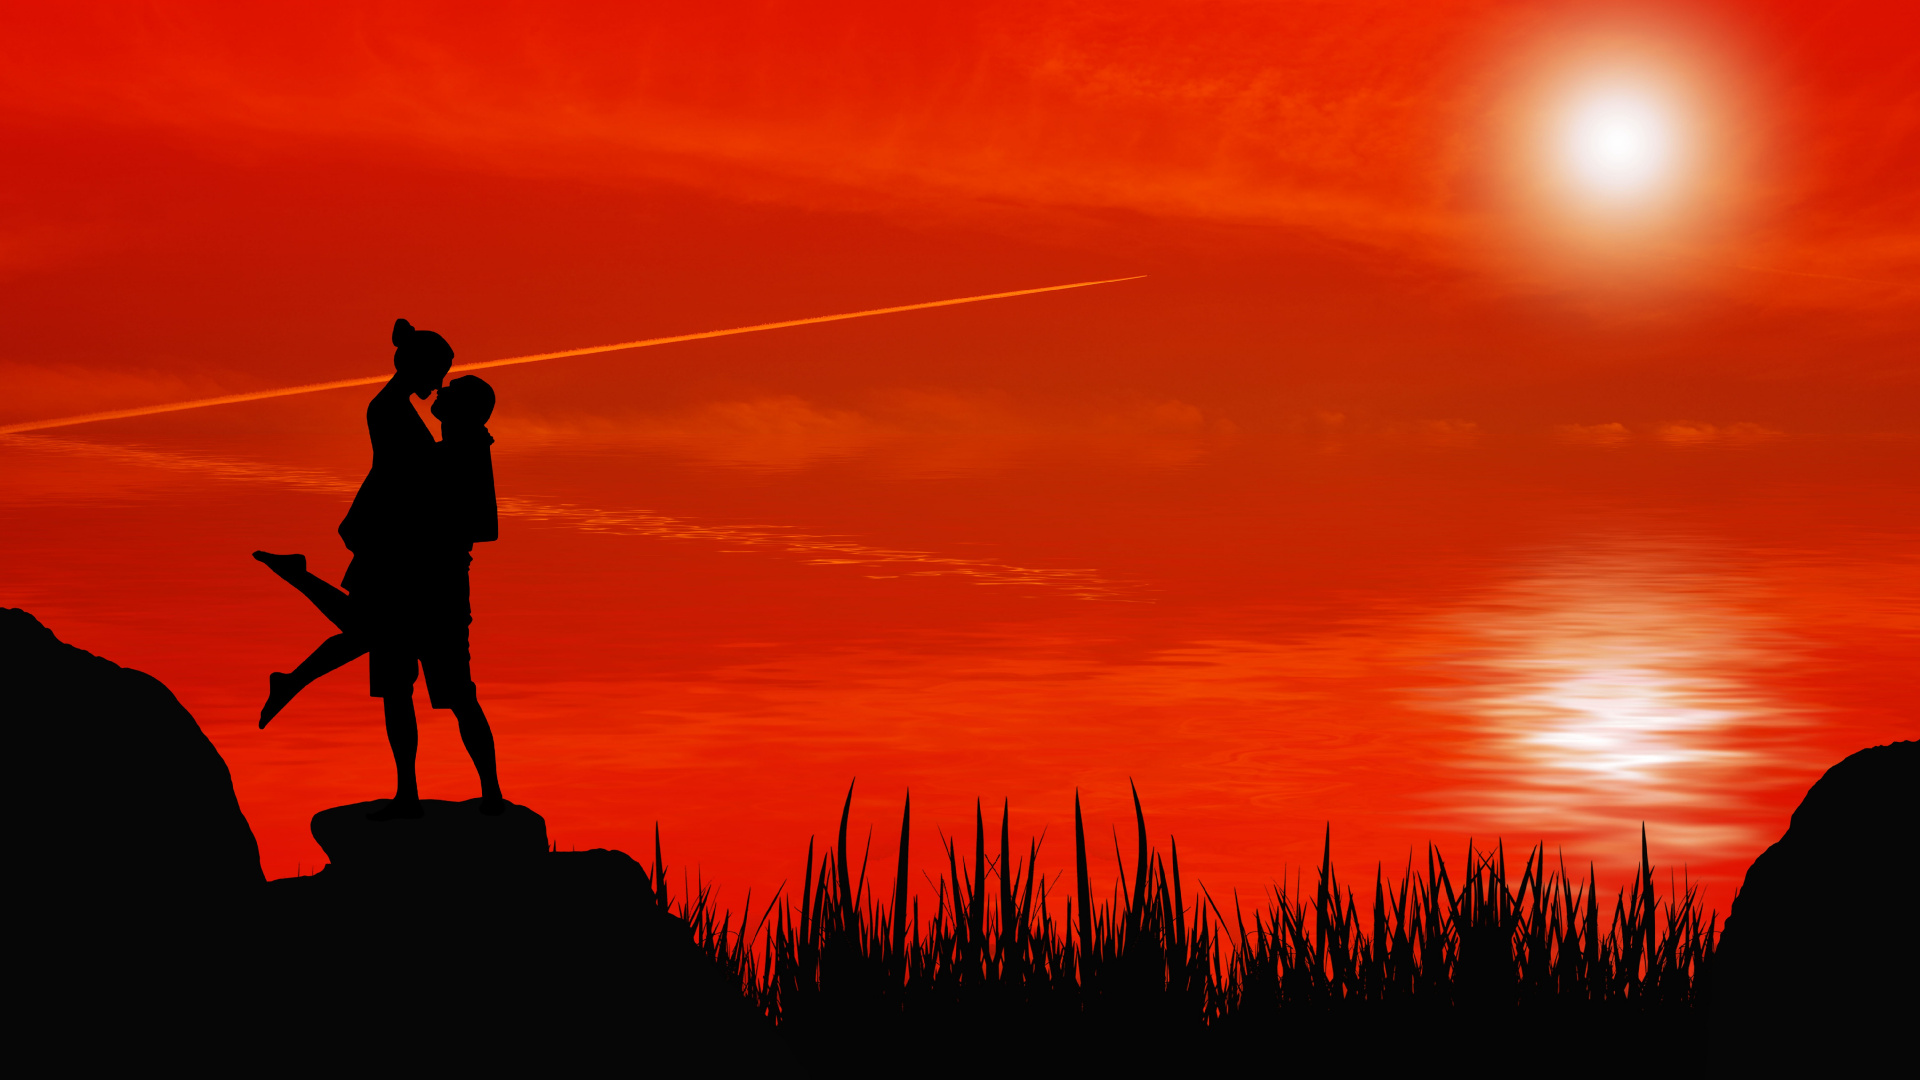 Silhouette, Sunset, Passion, People in Nature, Red. Wallpaper in 1920x1080 Resolution